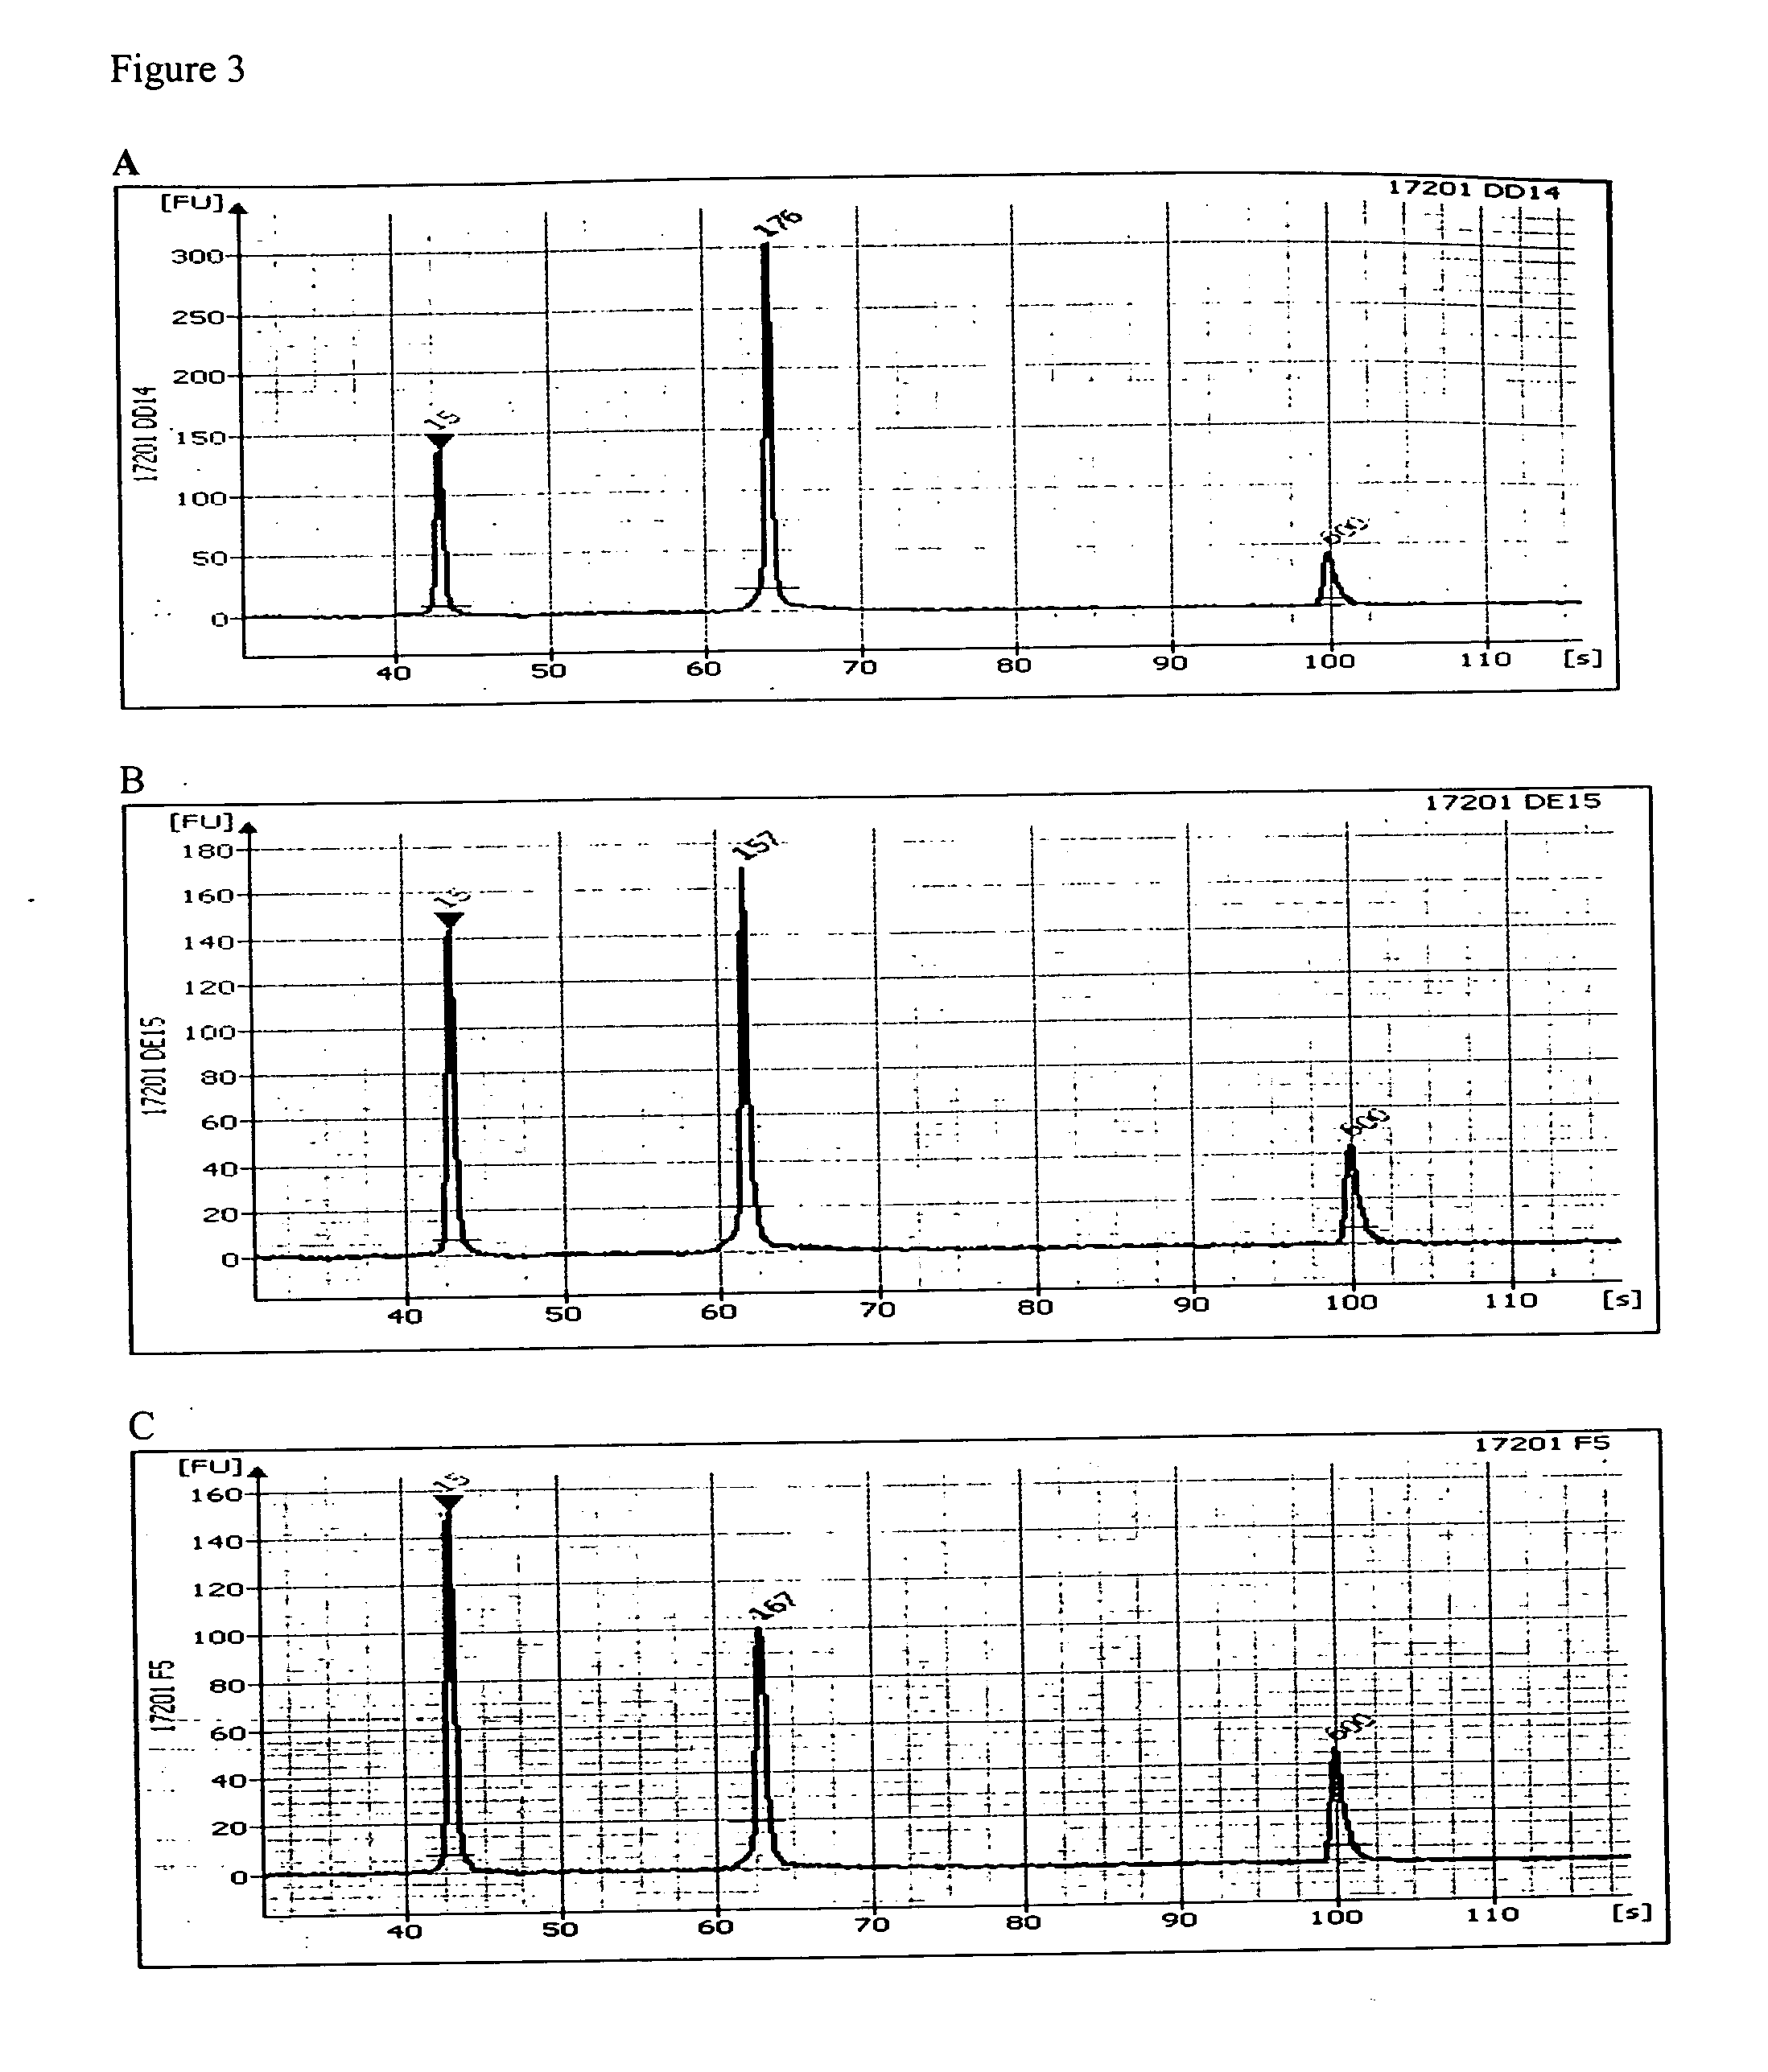 Methods for determining sequence variants using ultra-deep sequencing